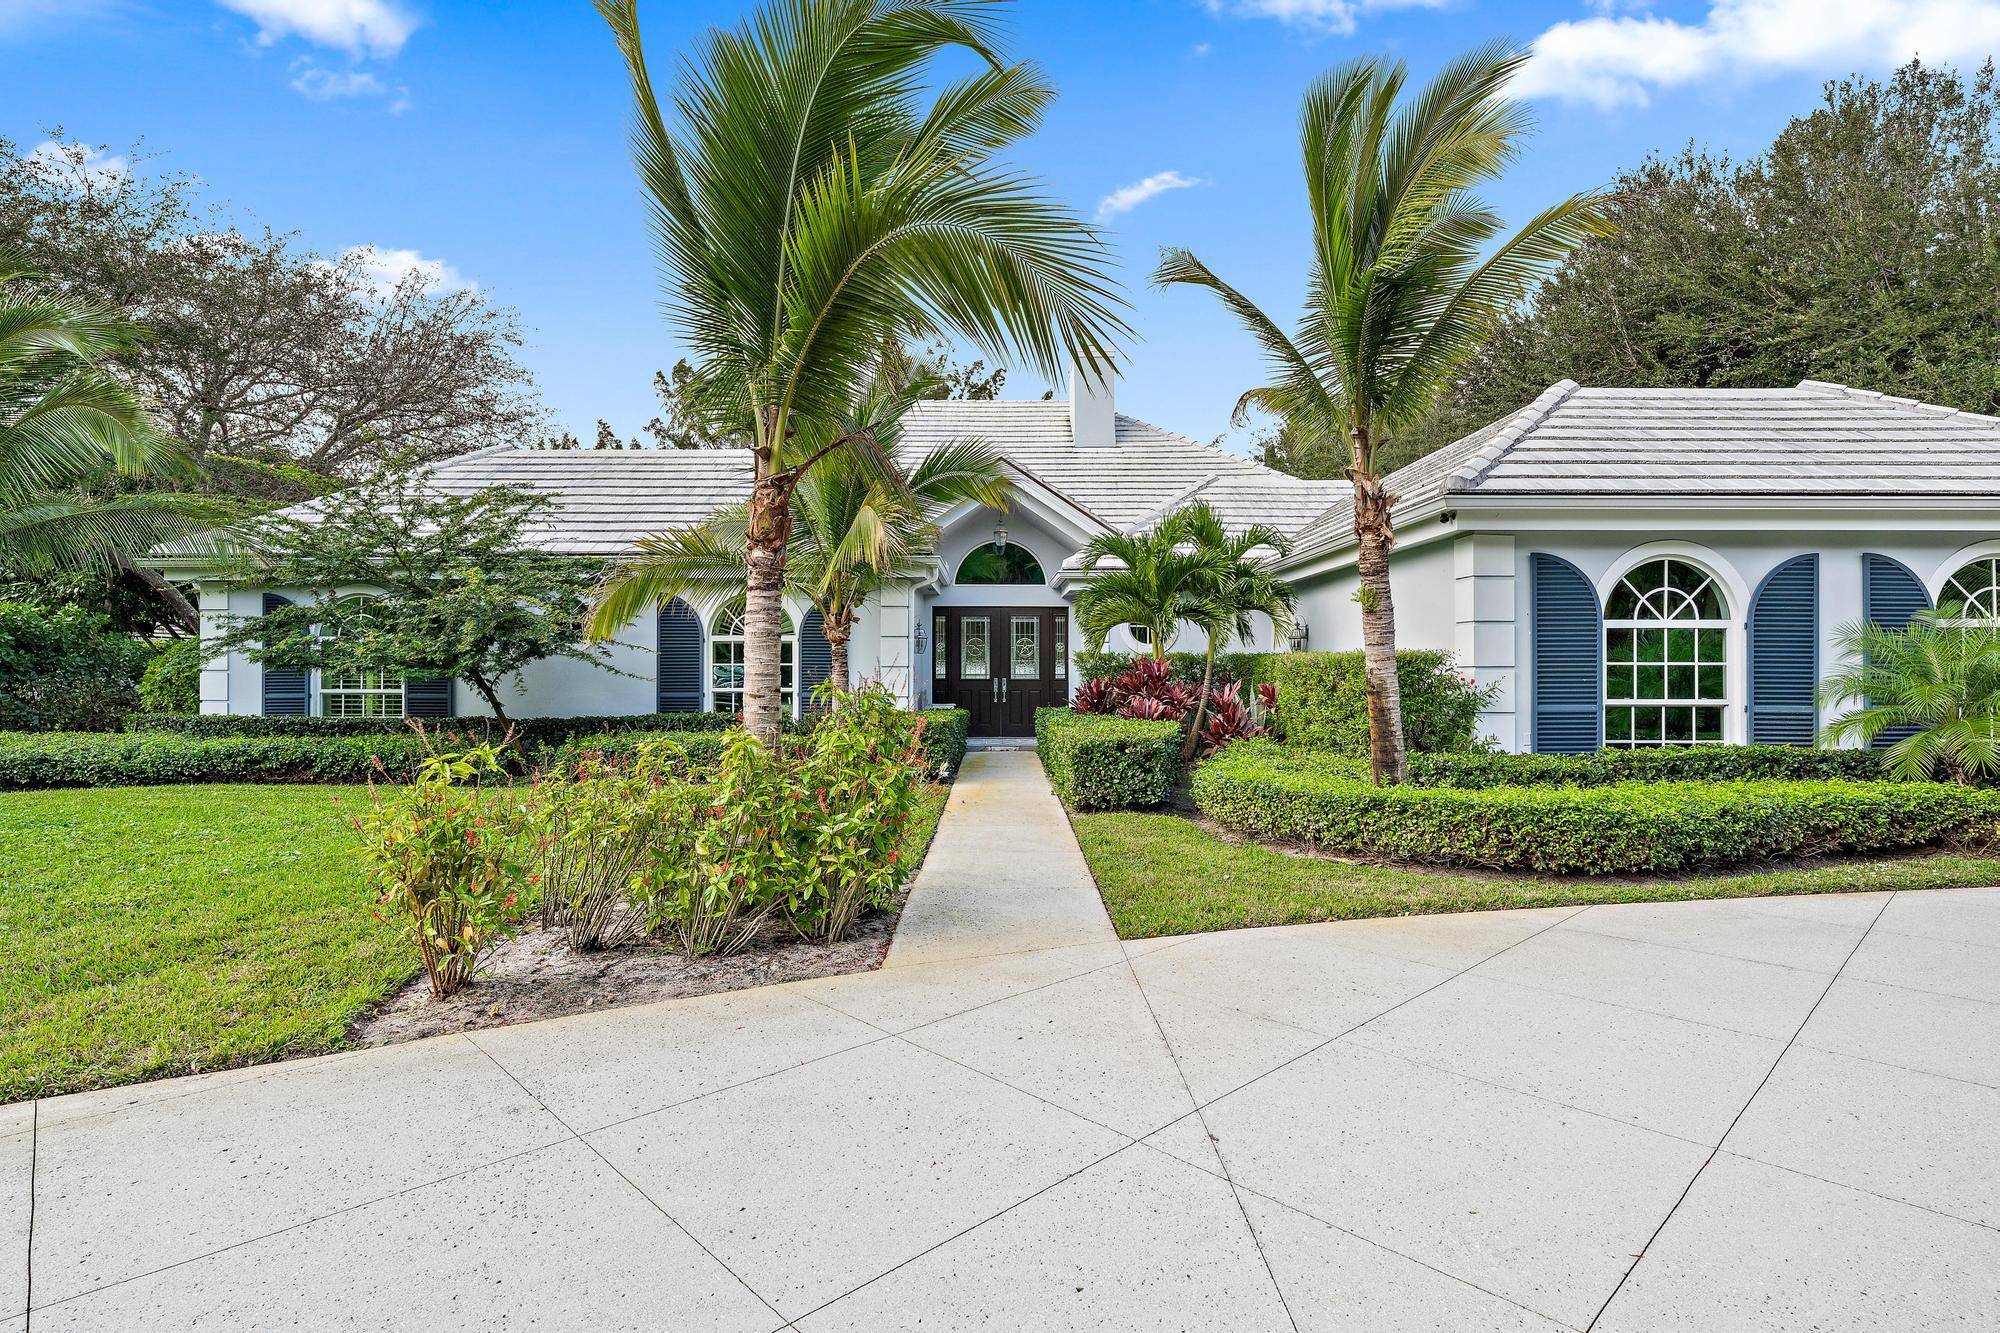 Welcome to this exceptional home within the coveted Seminole Landing community of North Palm Beach.